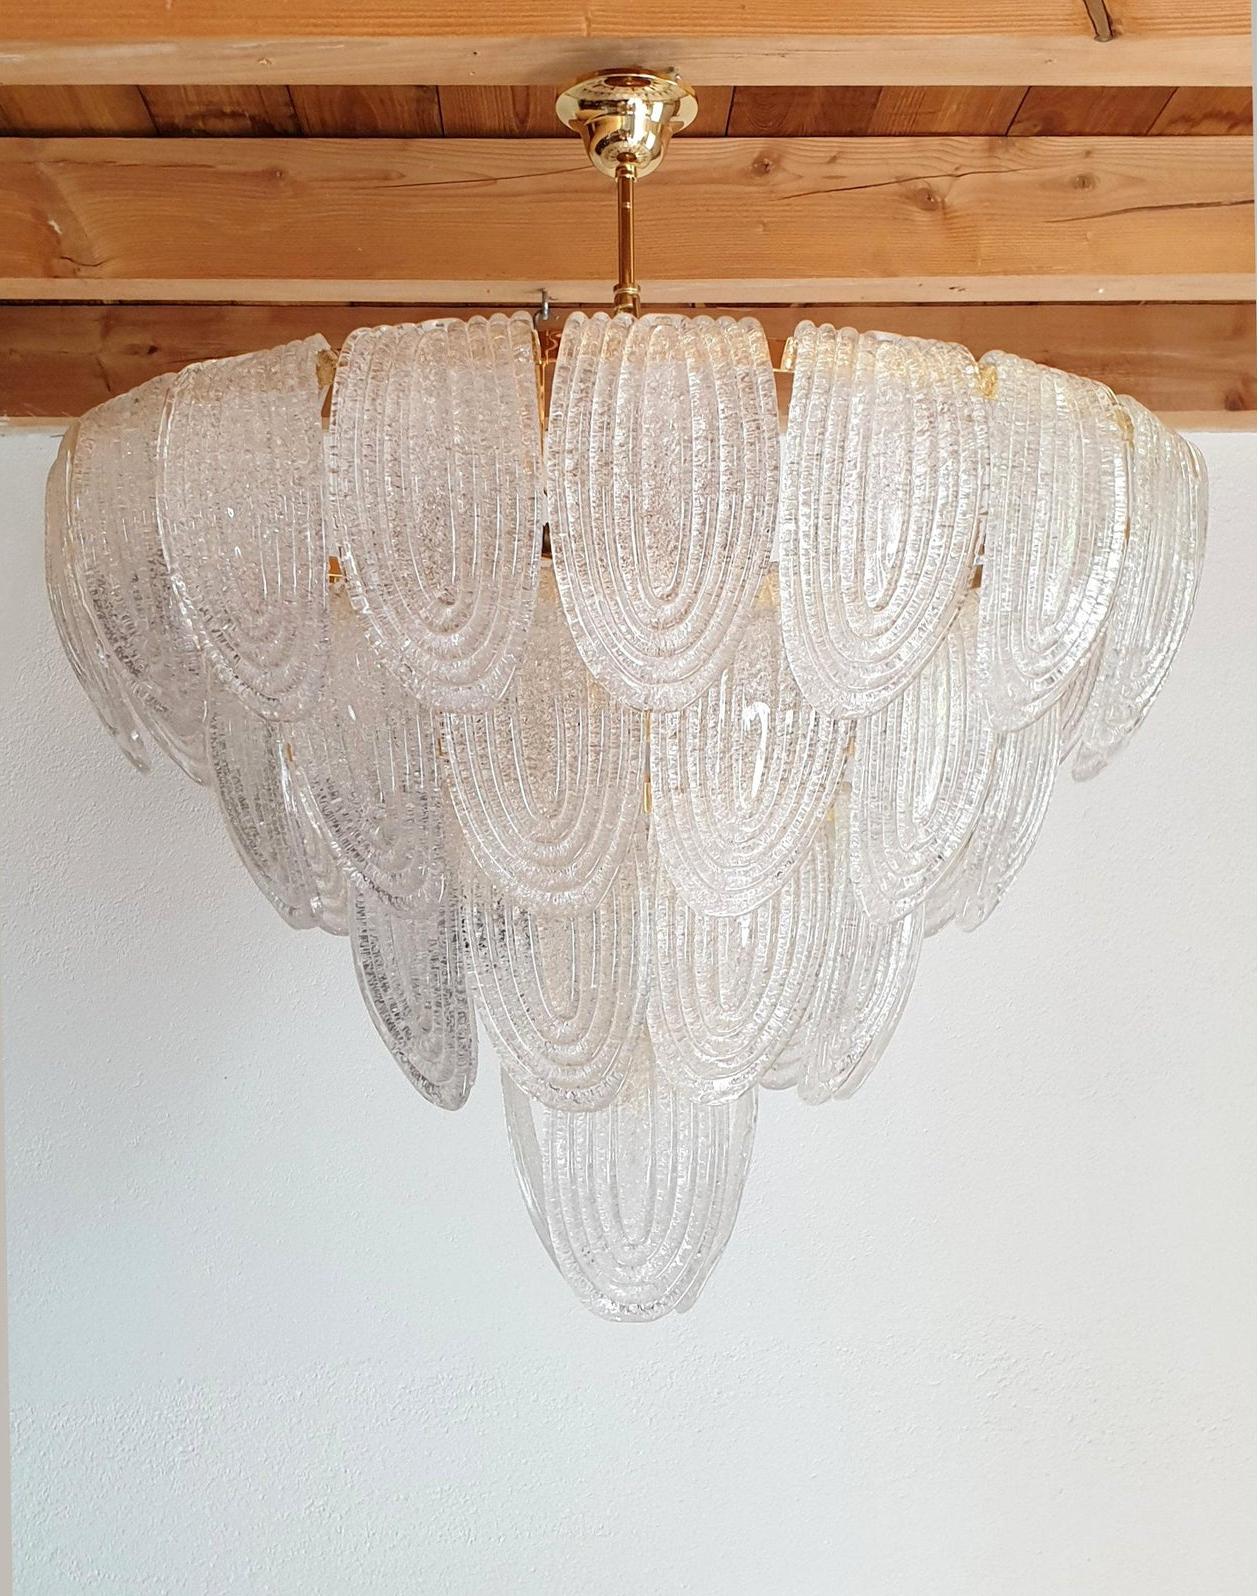 Mid-Century Modern large translucent and textured Murano glass chandelier, with gold-painted frame, canopy and chain.
The vintage Murano chandelier is attributed to AV Mazzega, Italy, 1970s
It has a neoclassical, or transitional style.
Three items